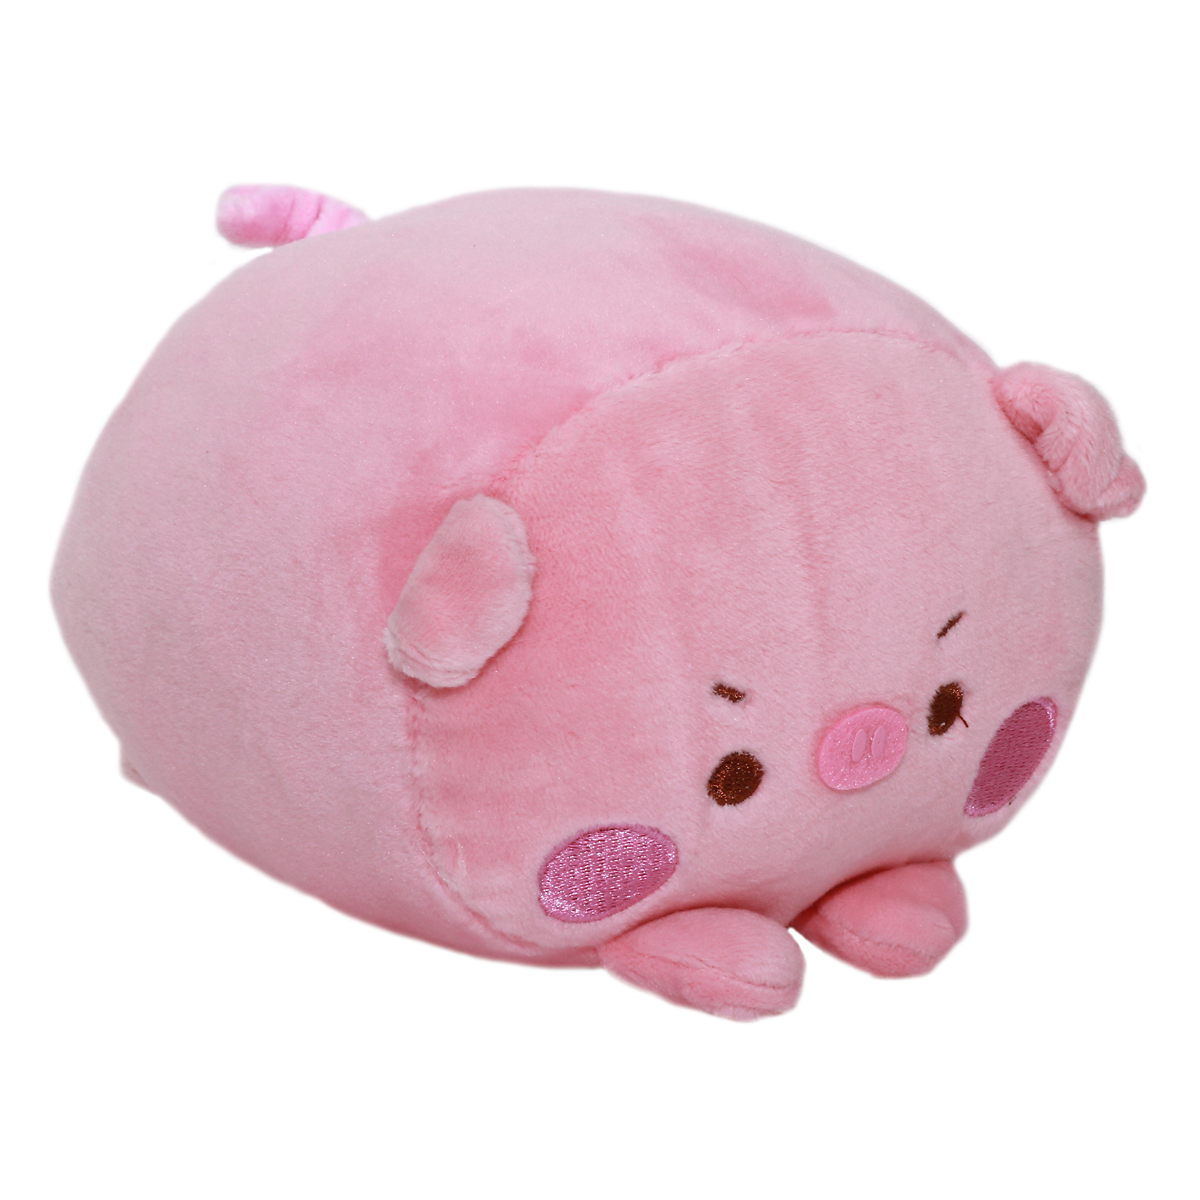 Soft & Squishy Big Bad Wolf Plush Collection Angry Pig Pink 6 Inches